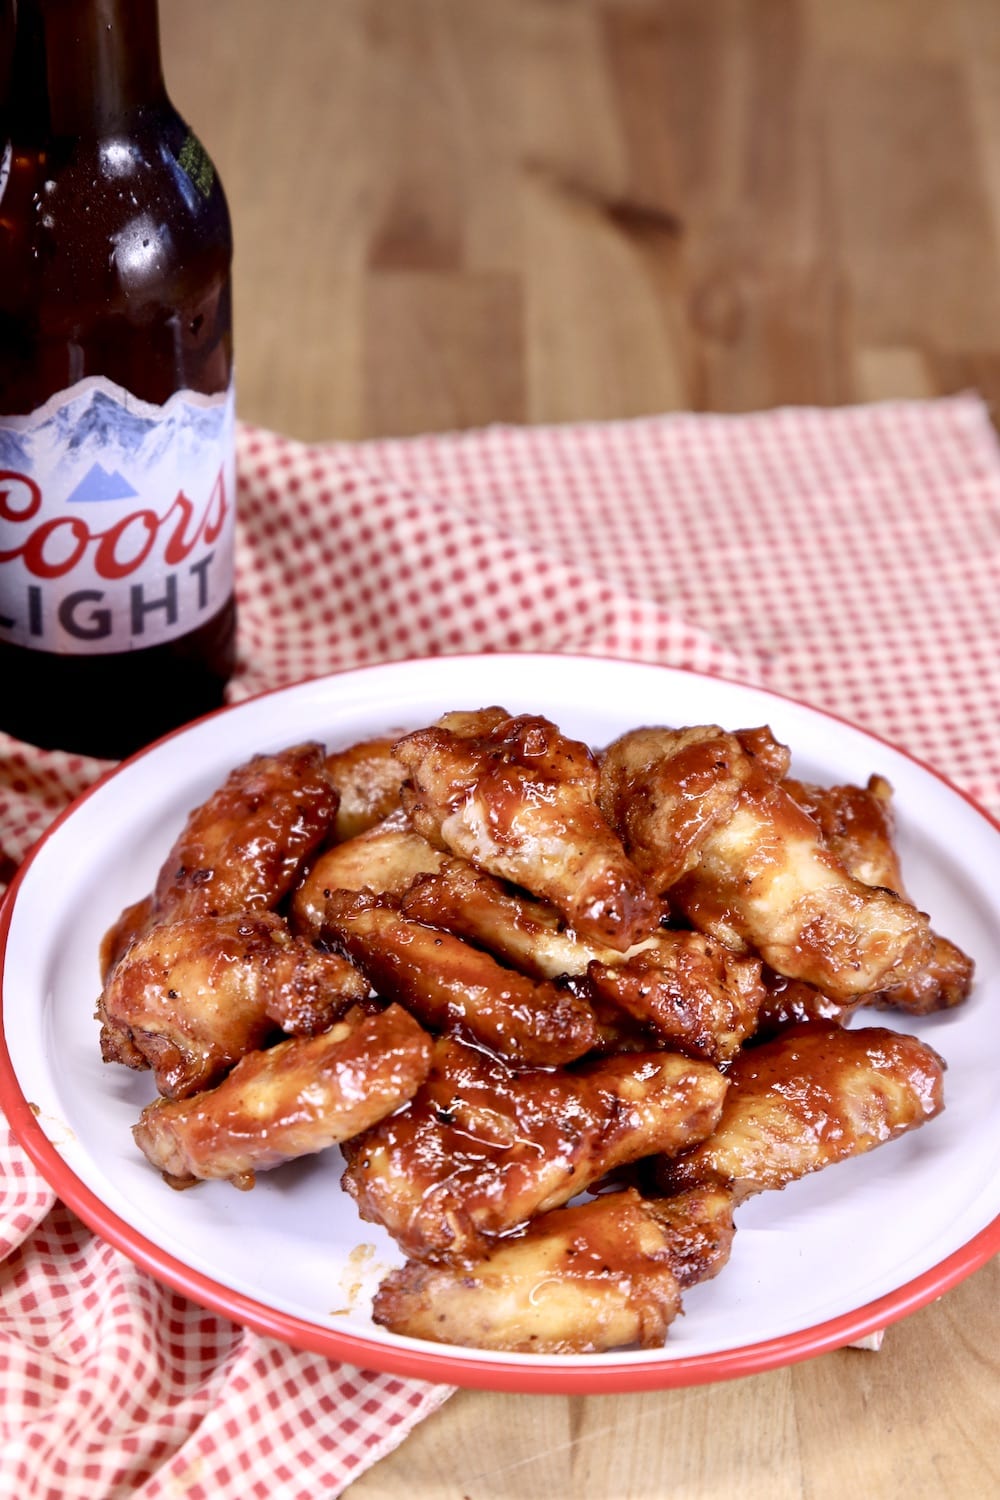 Chicken wings on a plate with a bottle of Coors beer, red check napkin